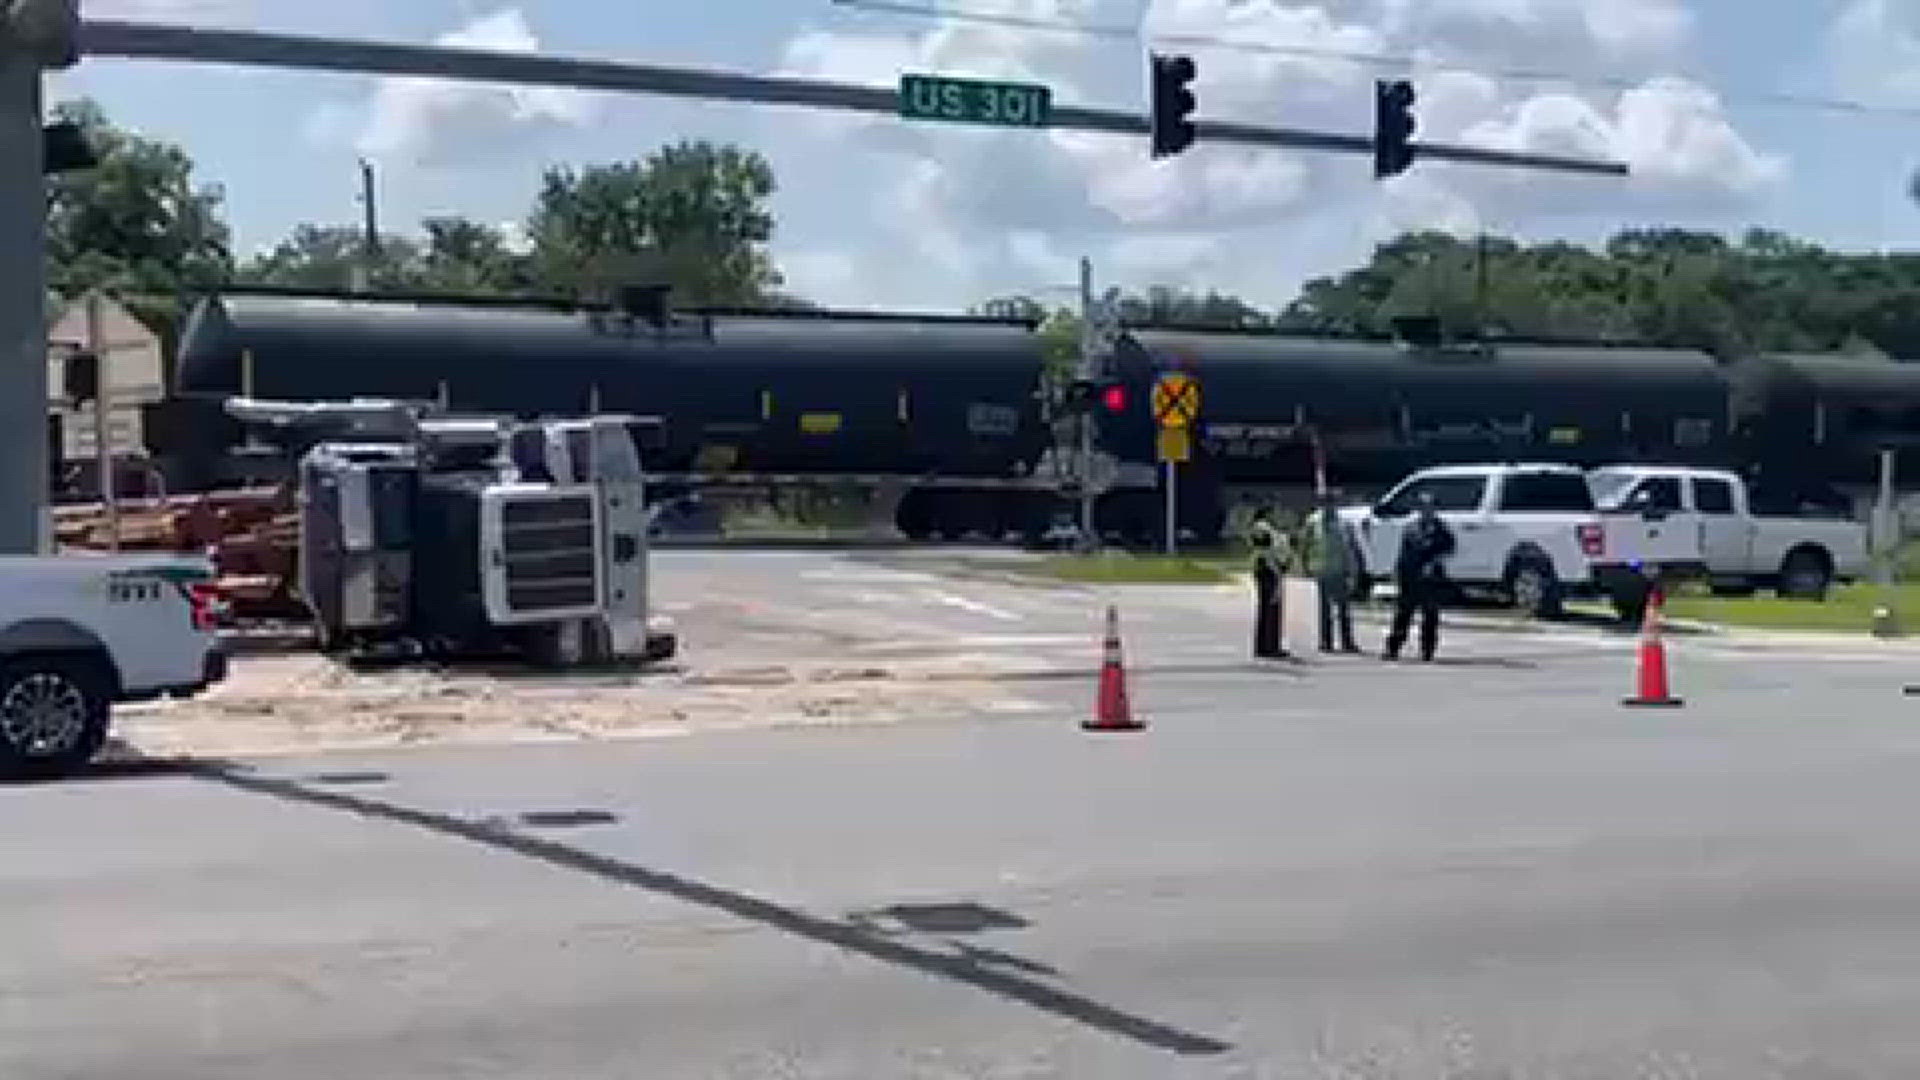 Bradford County Fire Rescue says the crossing at Lake Street will be blocked "for some time." No one has been reported injured as a result of the crash.
Credit: Atyia Collins